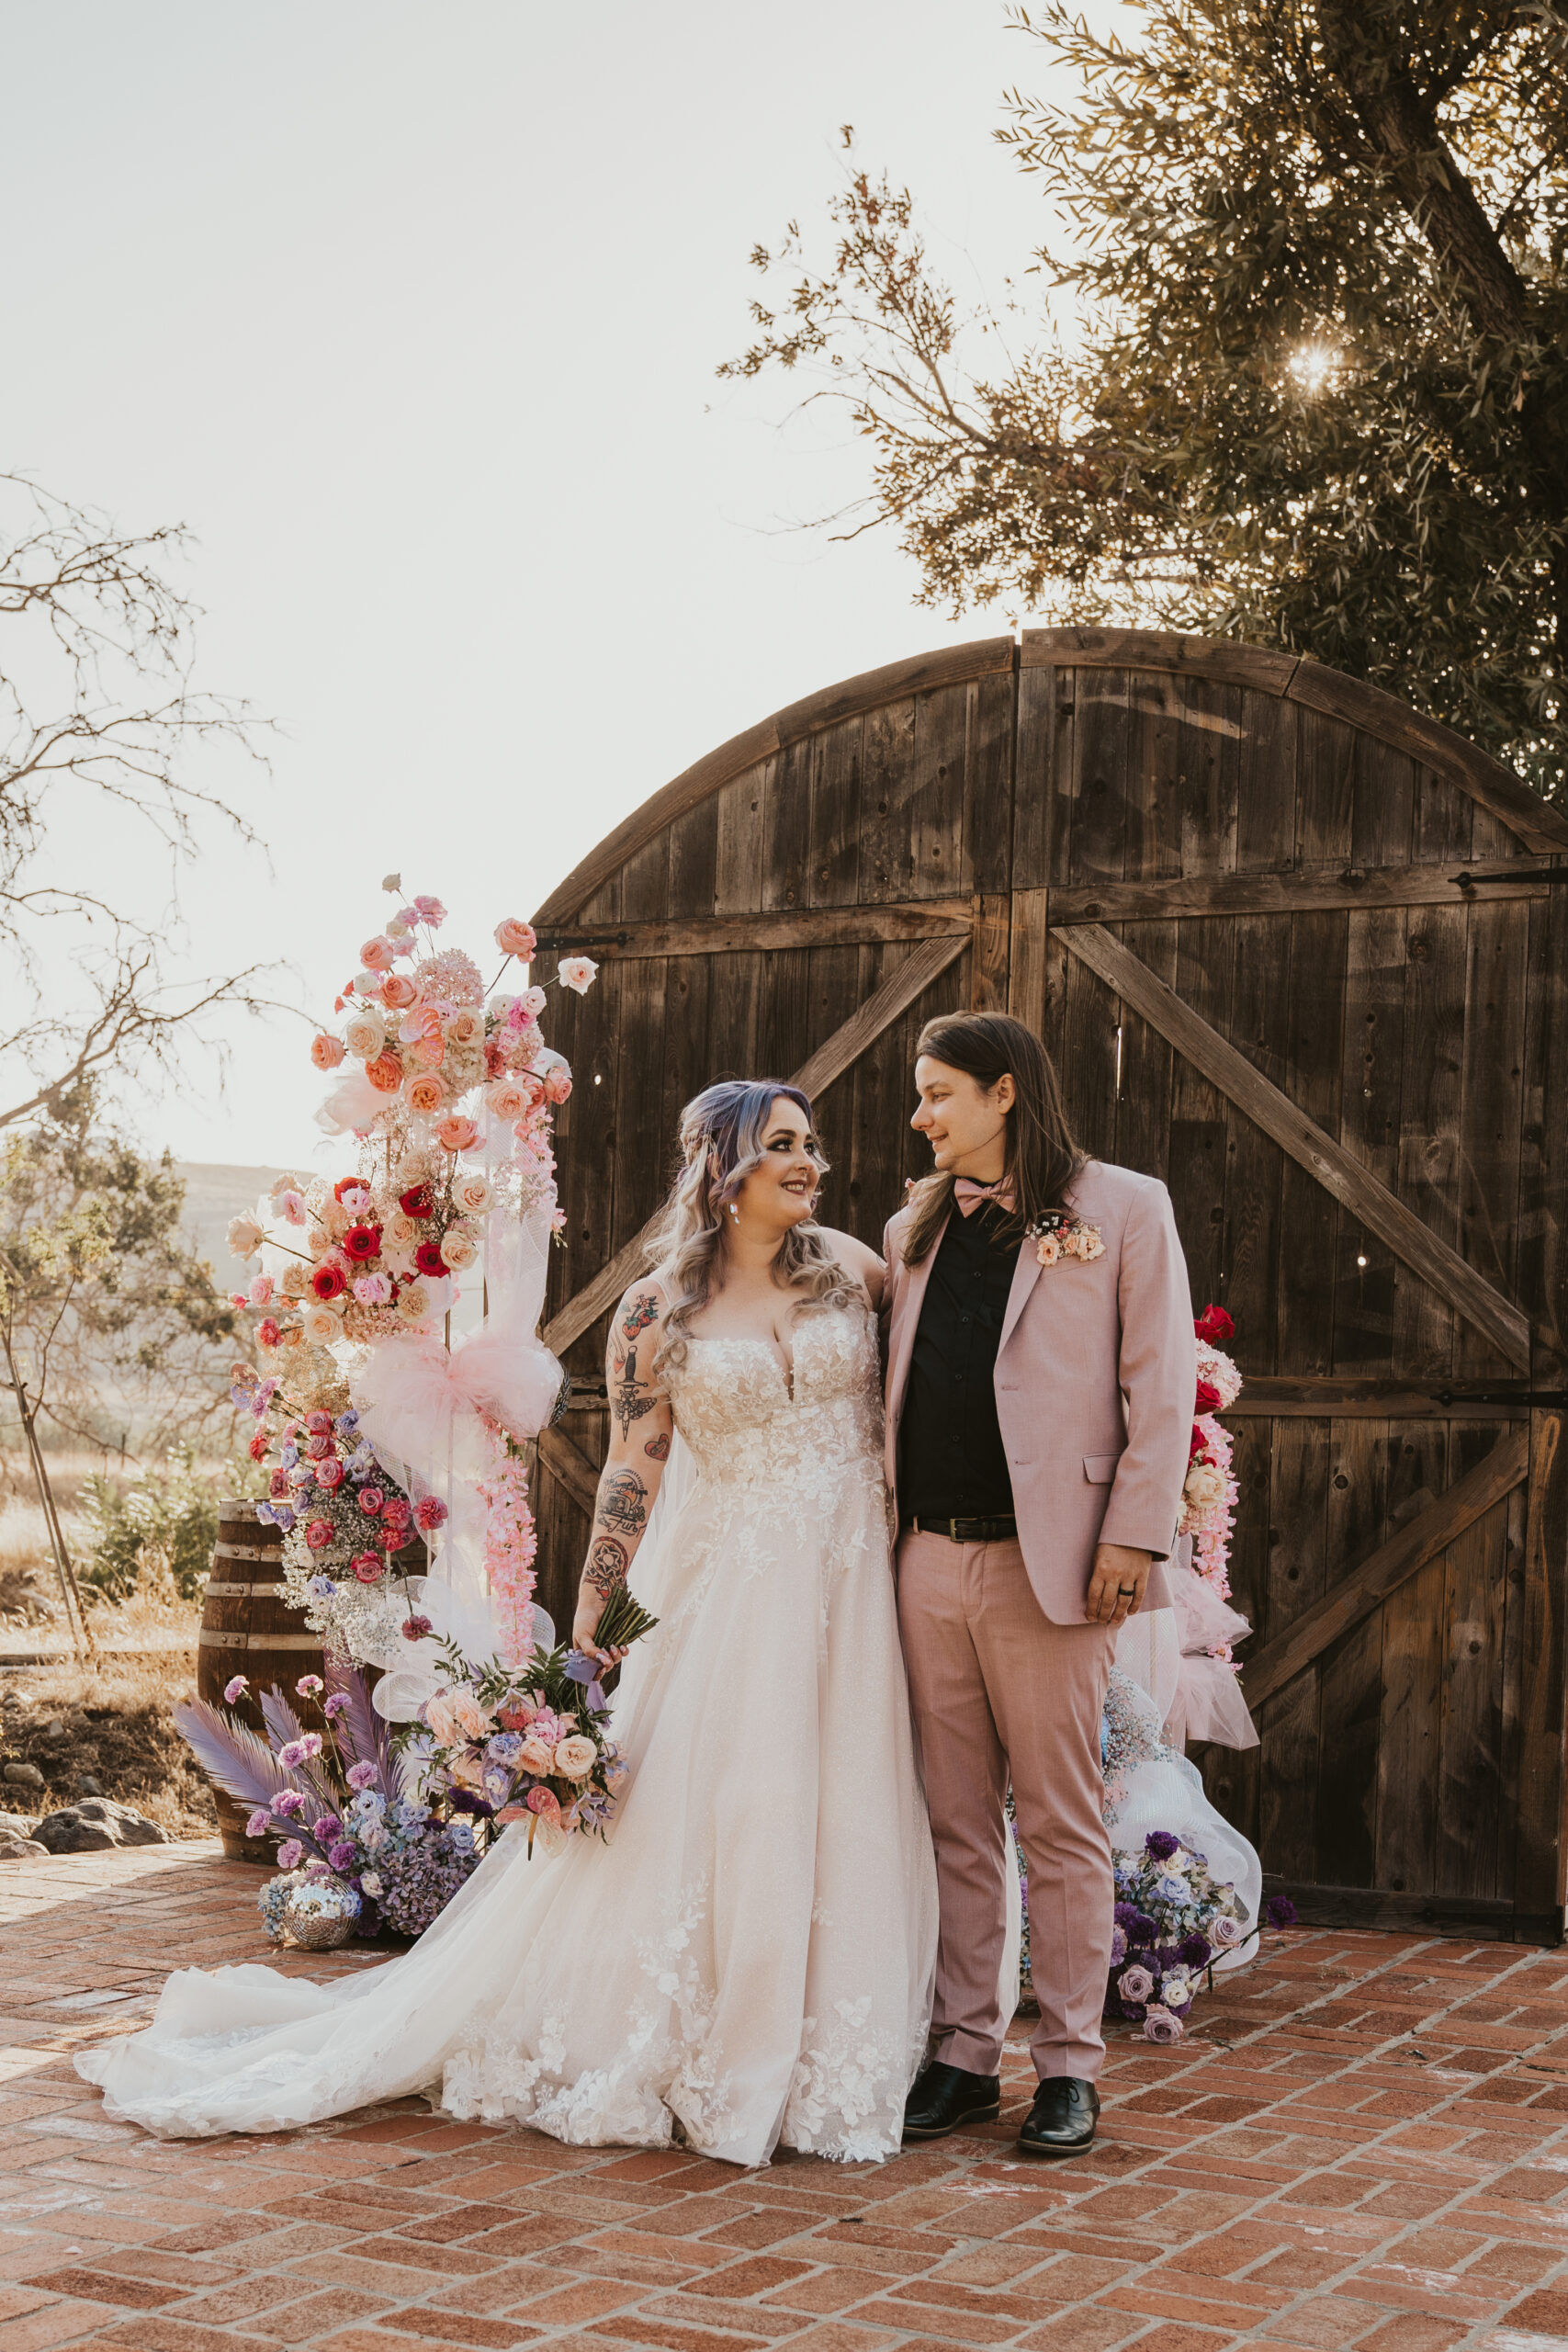 Newlywed couple standing in front of floral arrangements at altar after wedding in Livermore, California wine country during golden hour